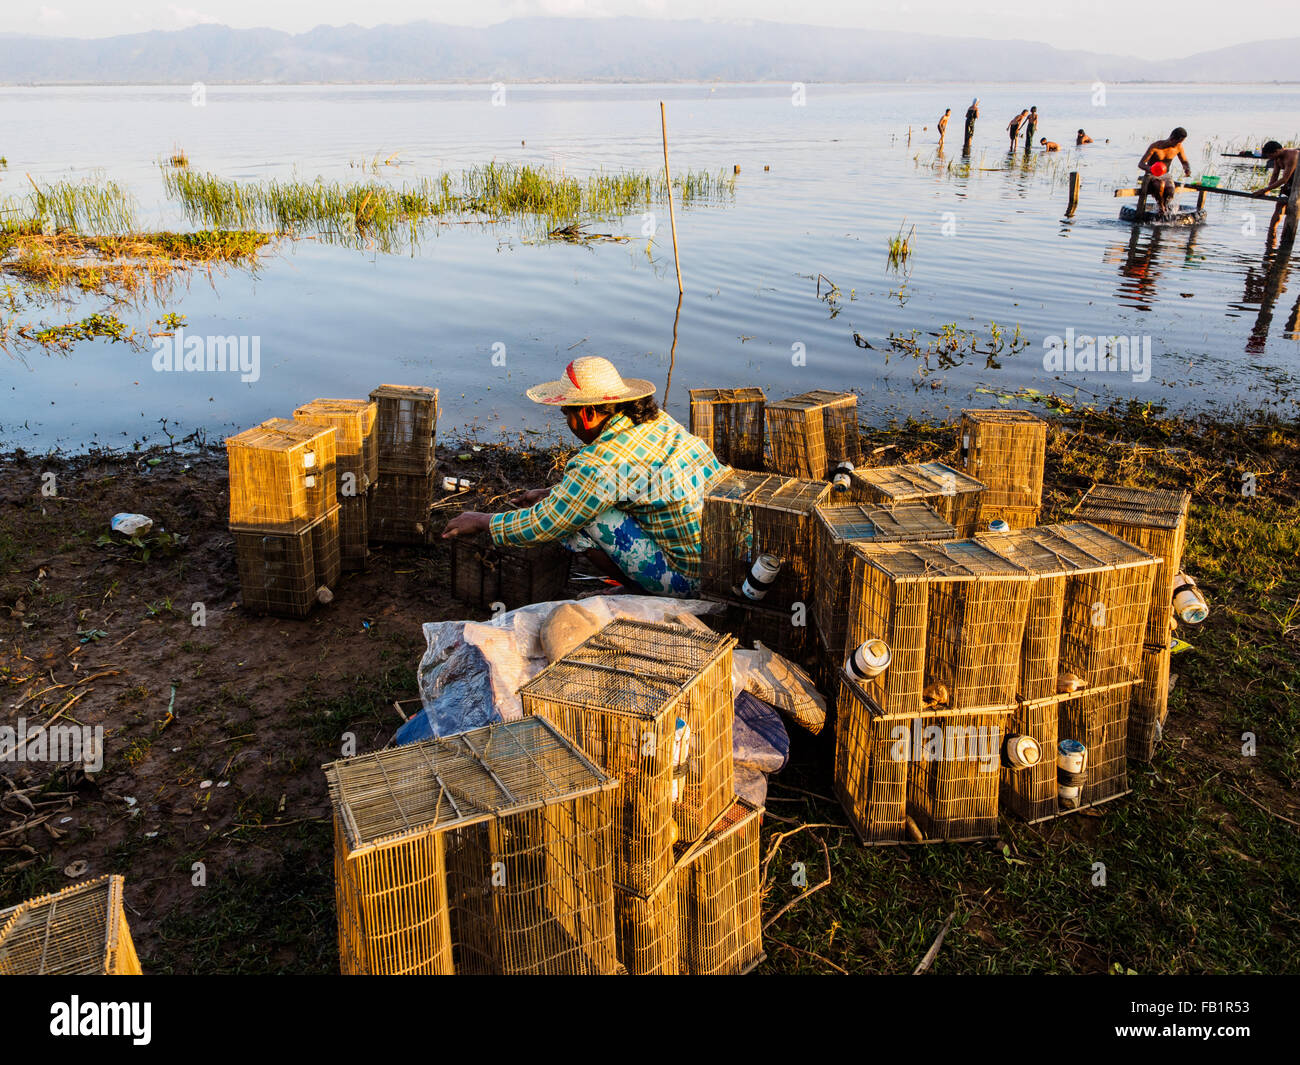 A local woman preparing fishing tool on the lake side. Stock Photo